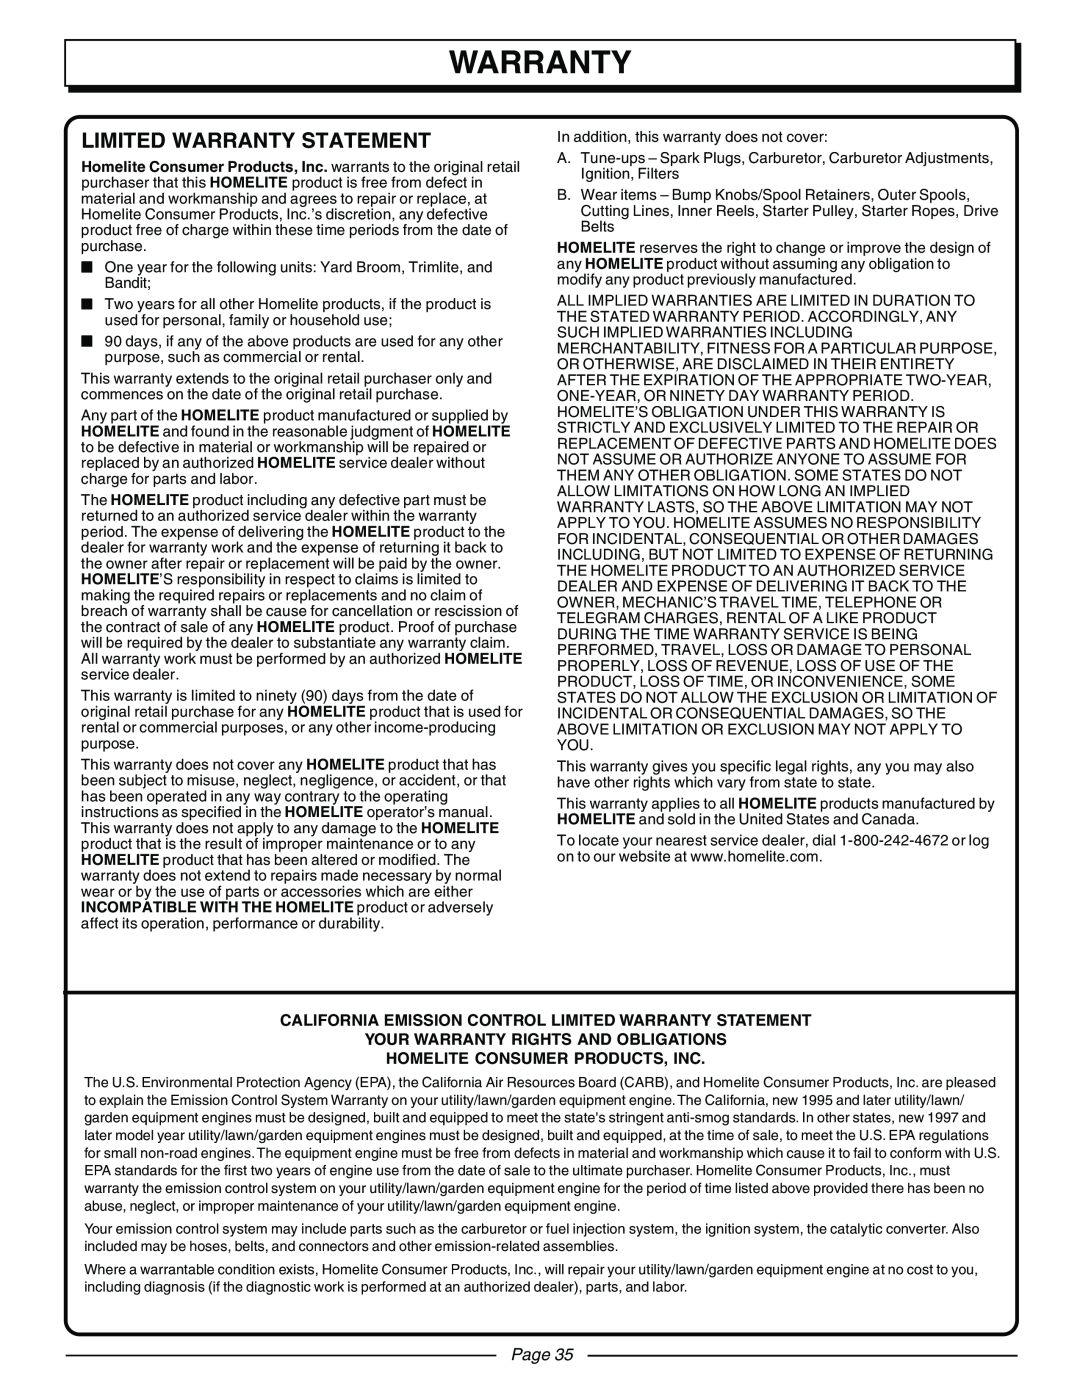 Homelite UT10570 manual Limited Warranty Statement, Page, Your Warranty Rights And Obligations 